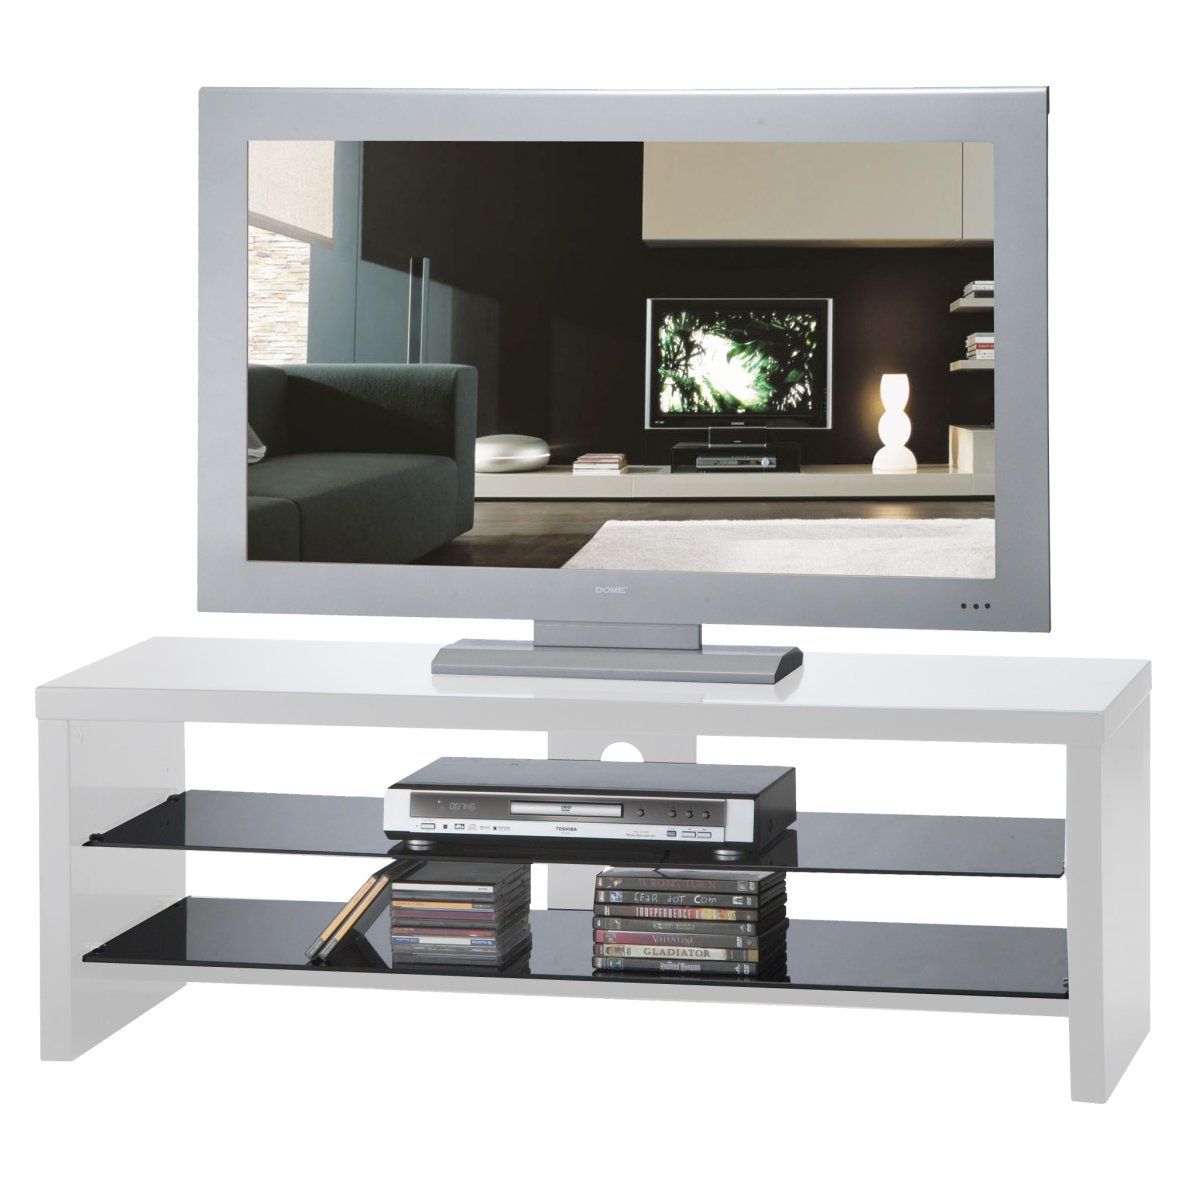 Gloss White Dome Tv Stand Flat Screen 40 + Inch | Ebay Regarding Tall Tv Stands For Flat Screen (View 8 of 15)